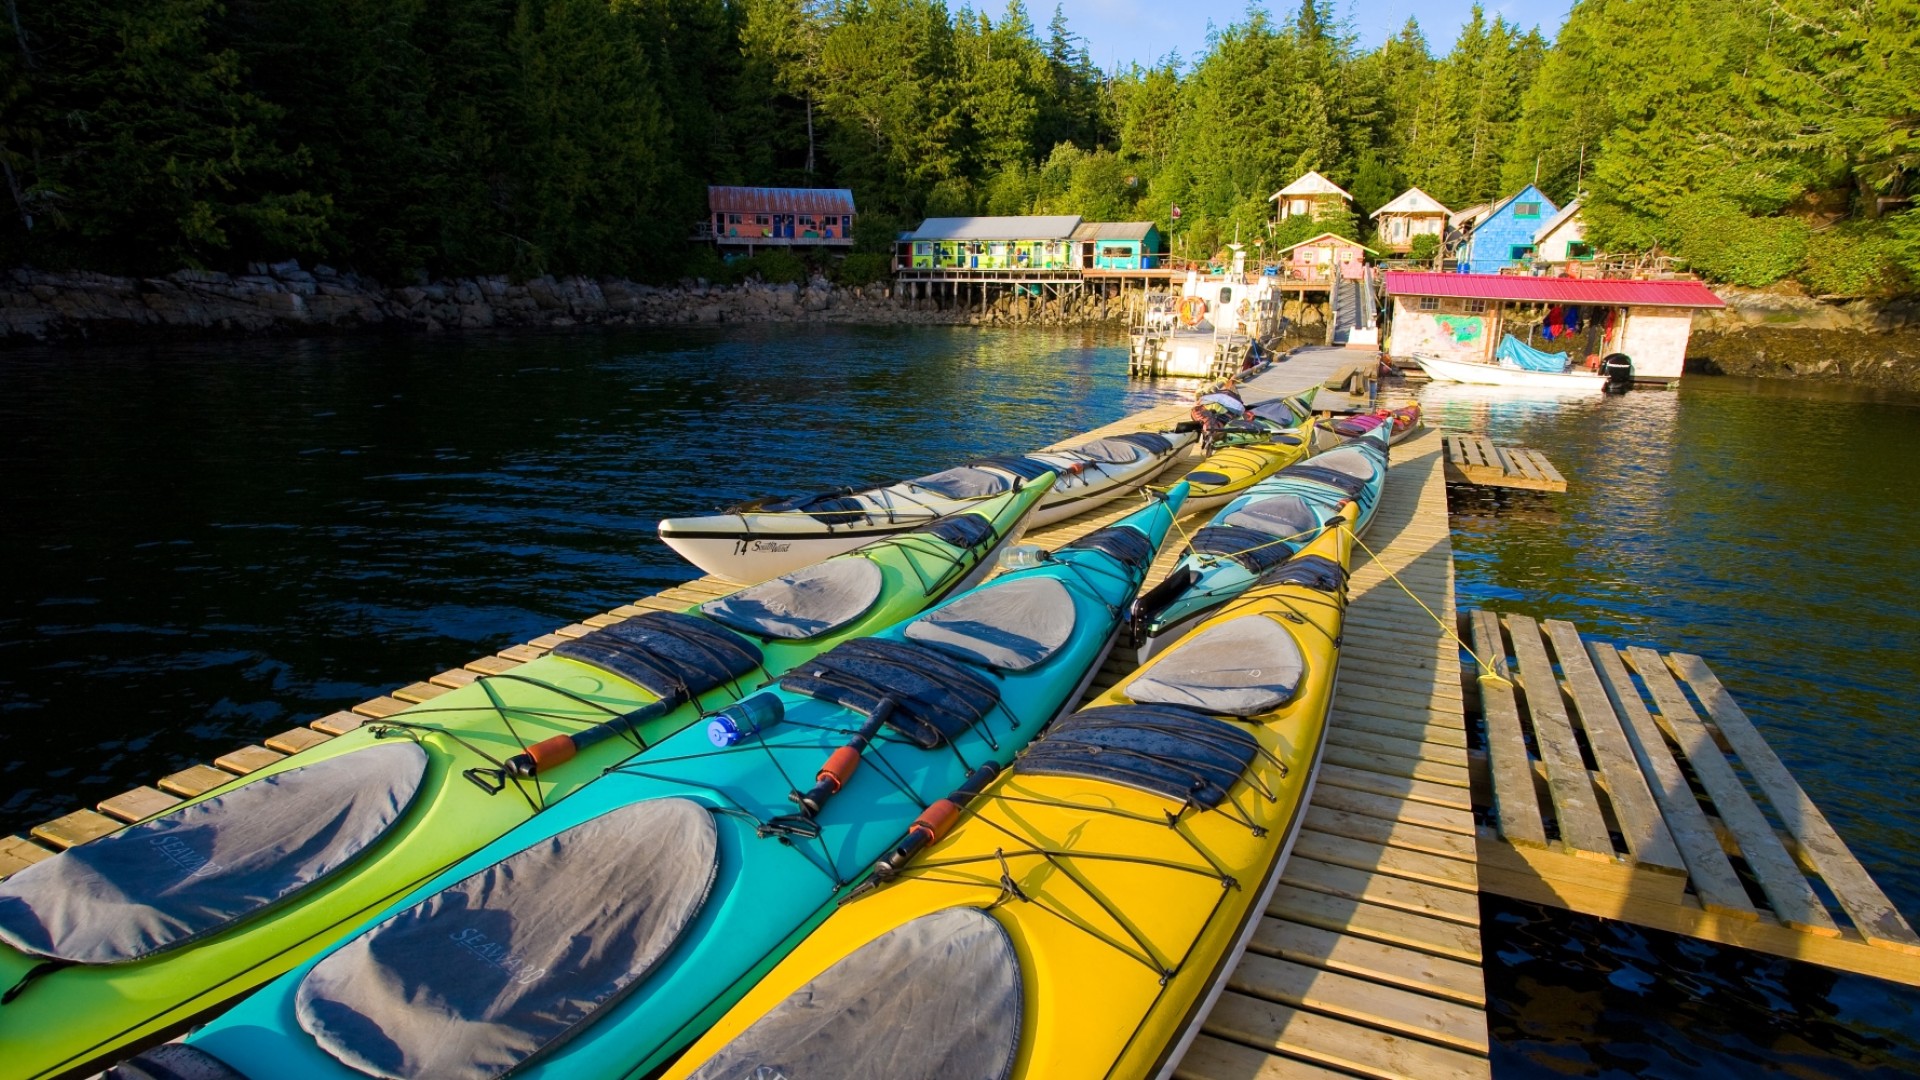 Numerous kayaks of all colors scattered across a dock at a private resort in God's Pocket Provincial Park